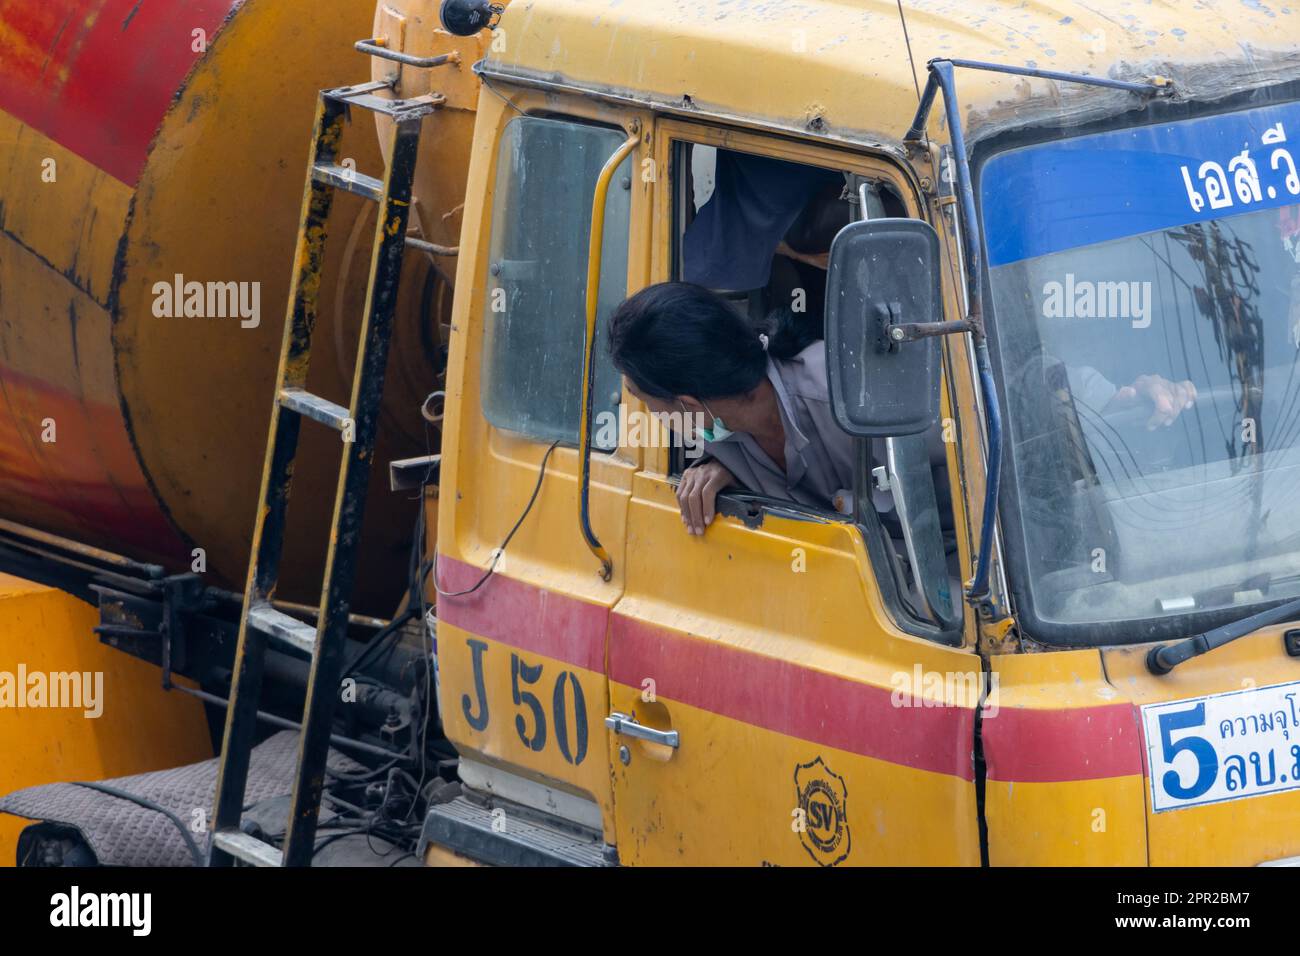 SAMUT PRAKAN, THAILAND, JAN 31 2023, The blender truck driver looks out of the open window and backs up Stock Photo